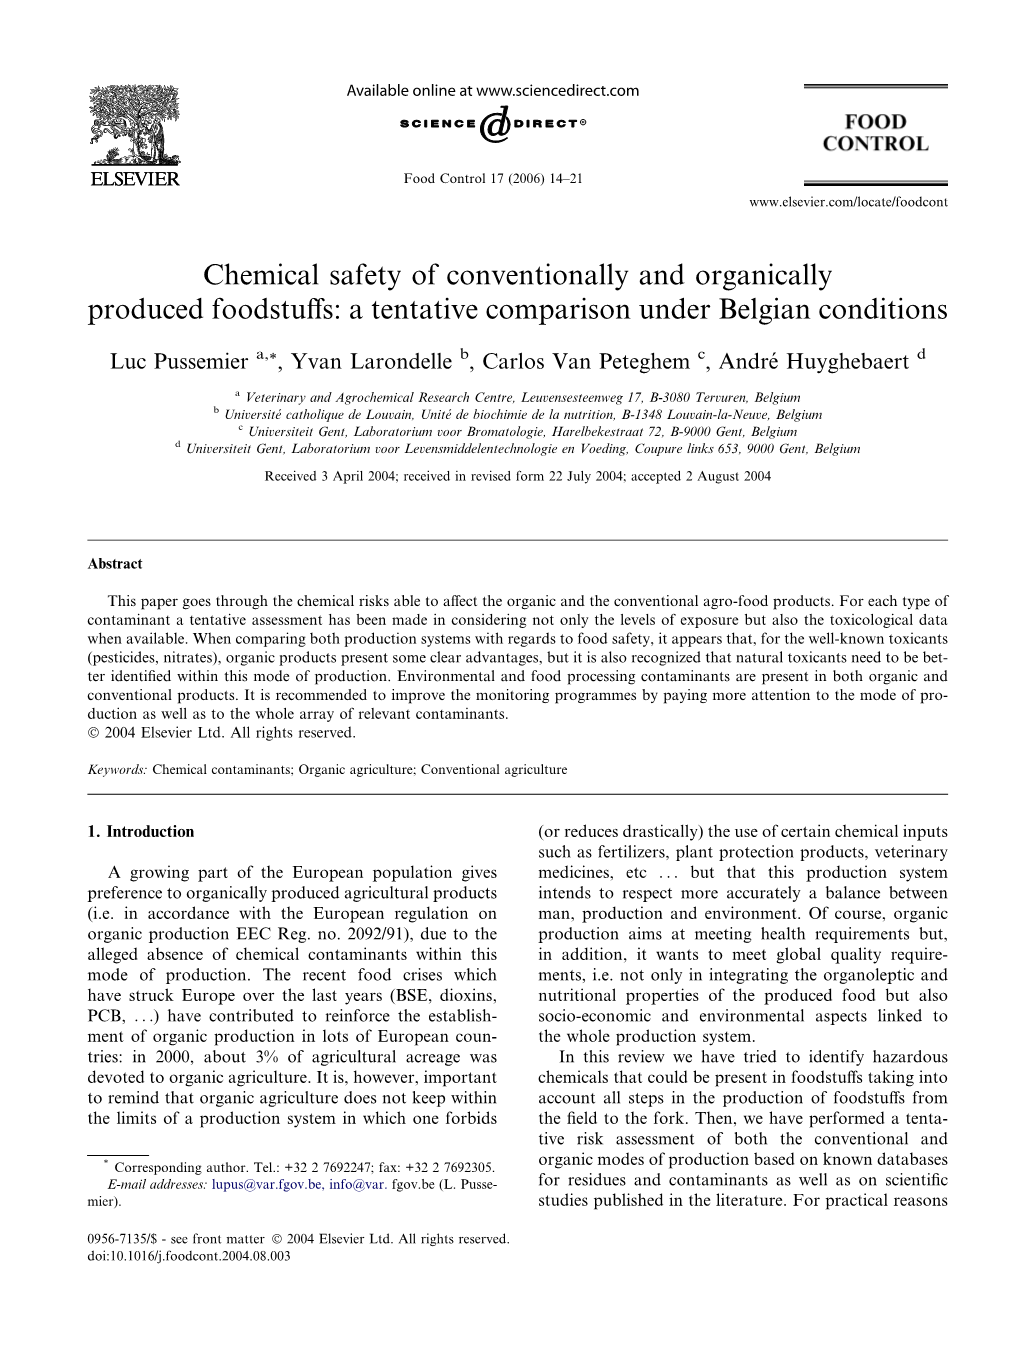 Chemical Safety of Conventionally and Organically Produced Foodstuffs